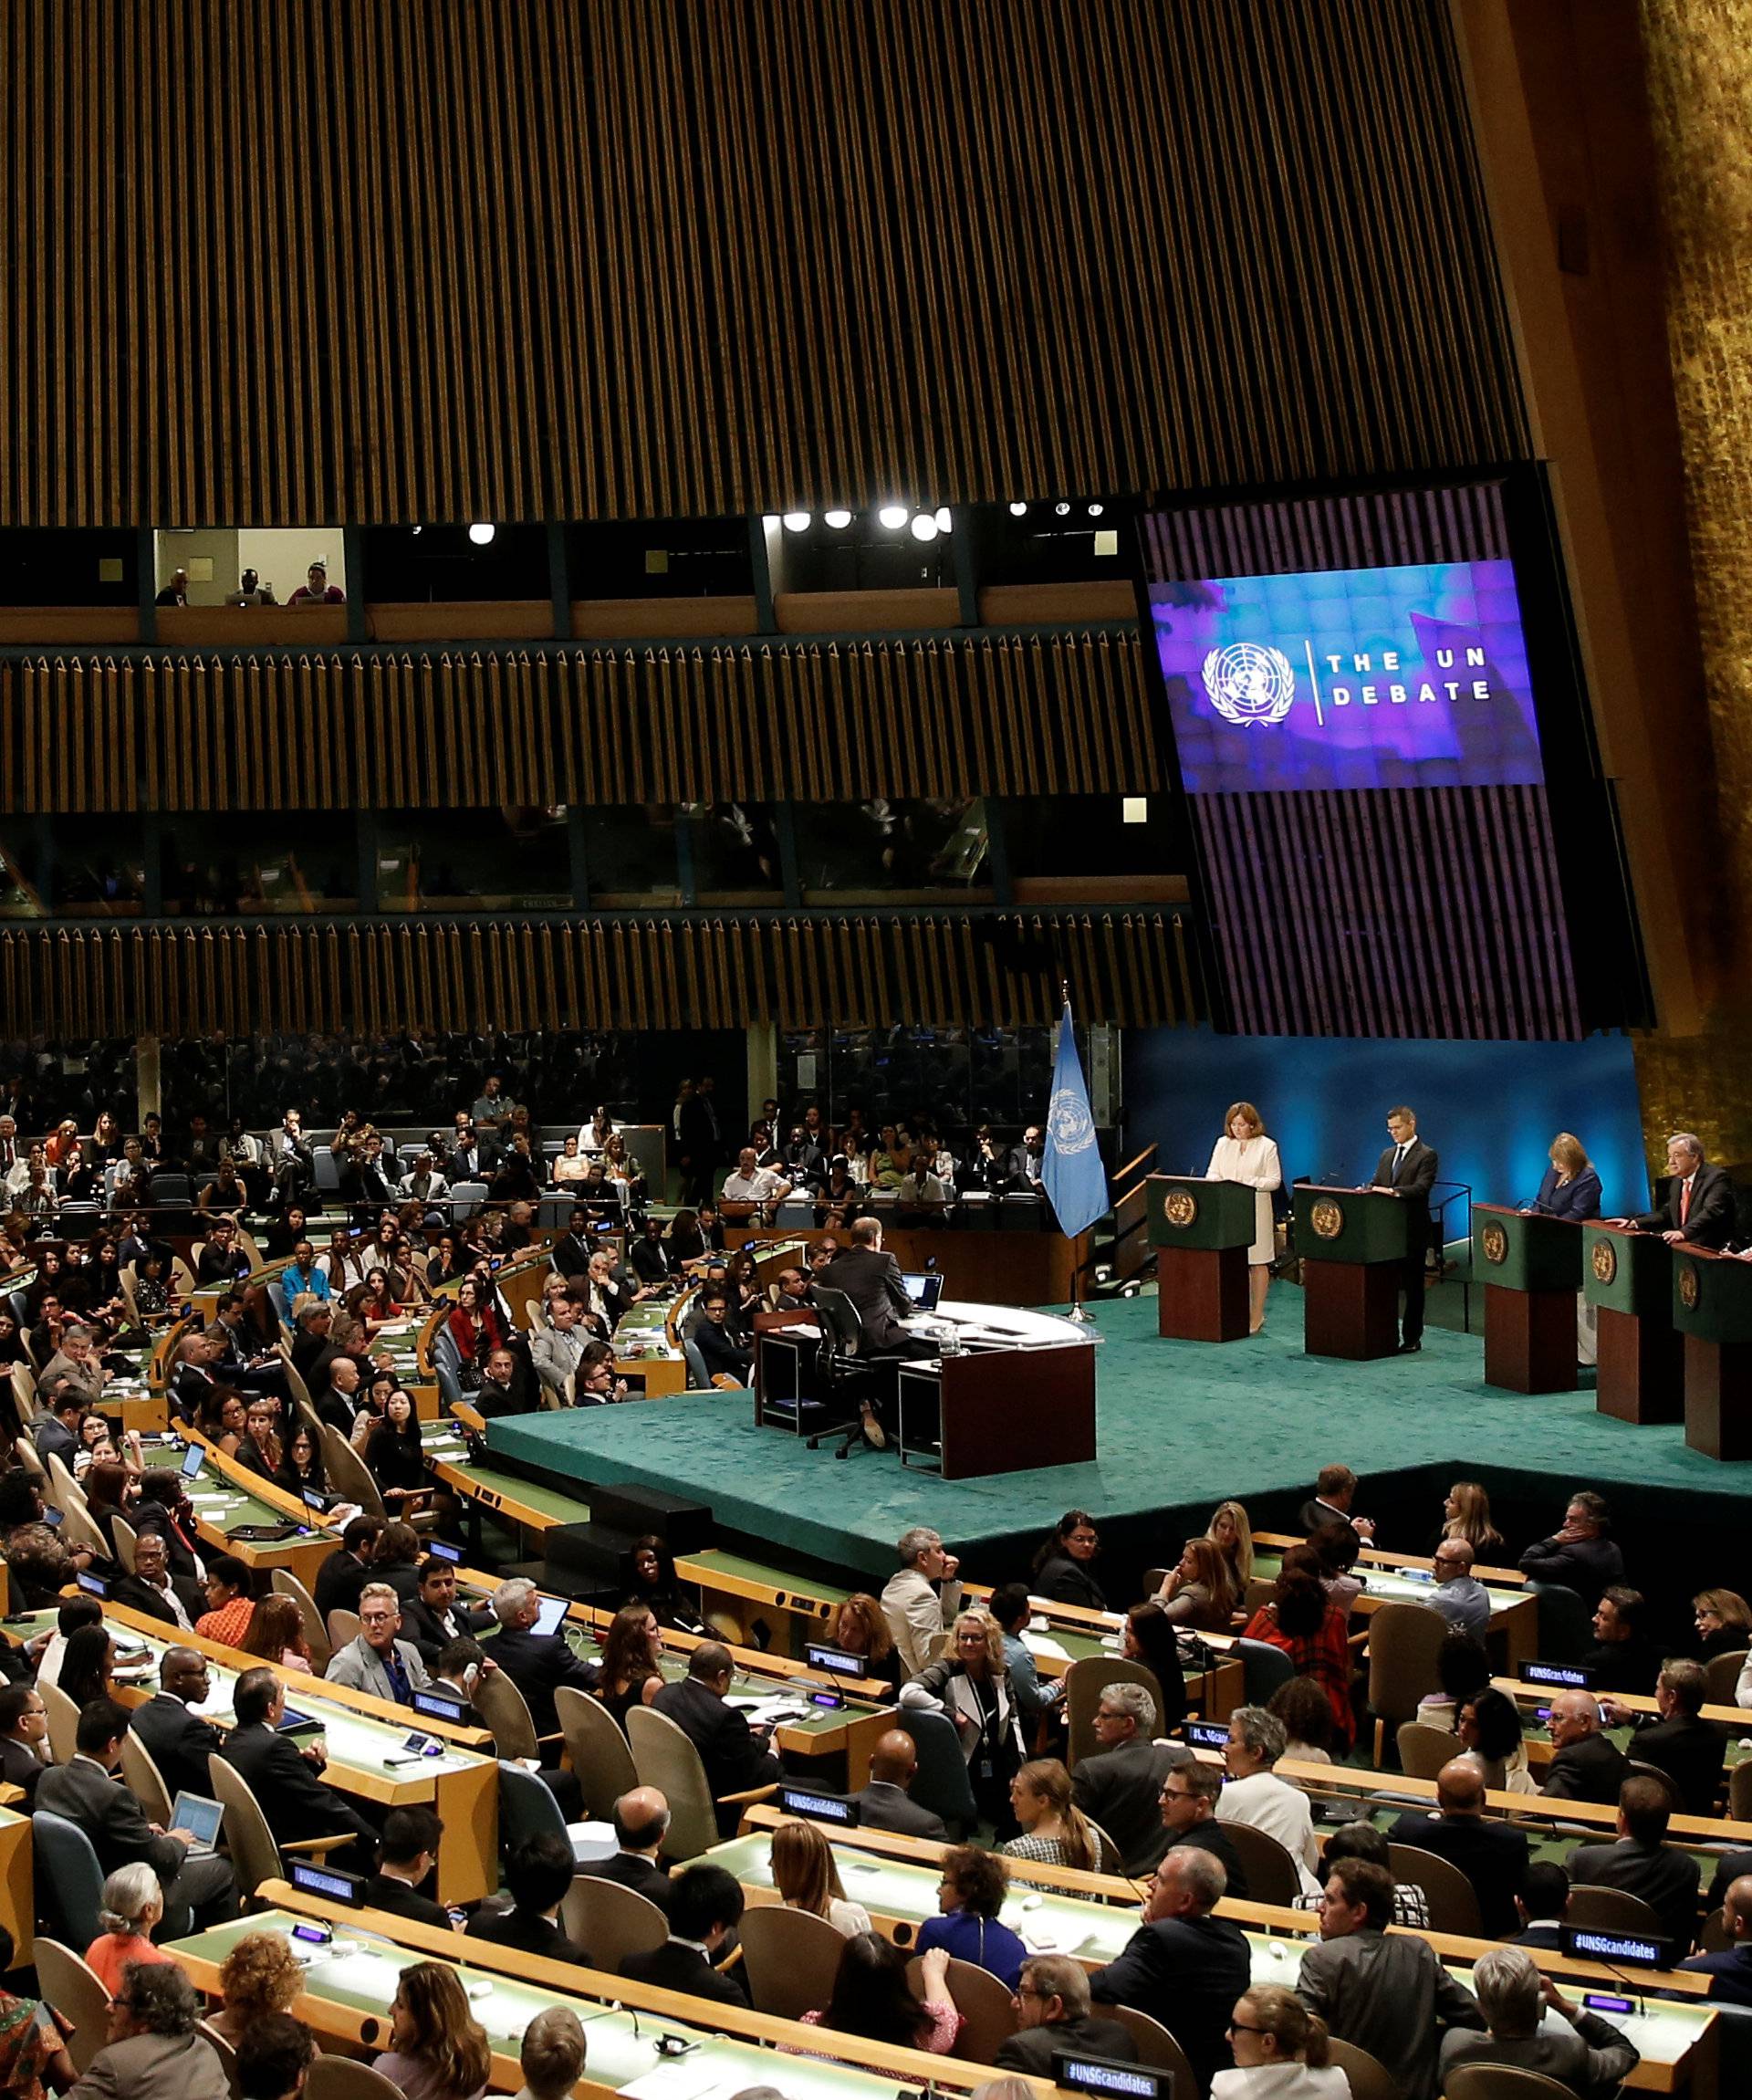 Candidates vying to be the next United Nations Secretary General debate in the General Assembly at U.N. headquarters in New York